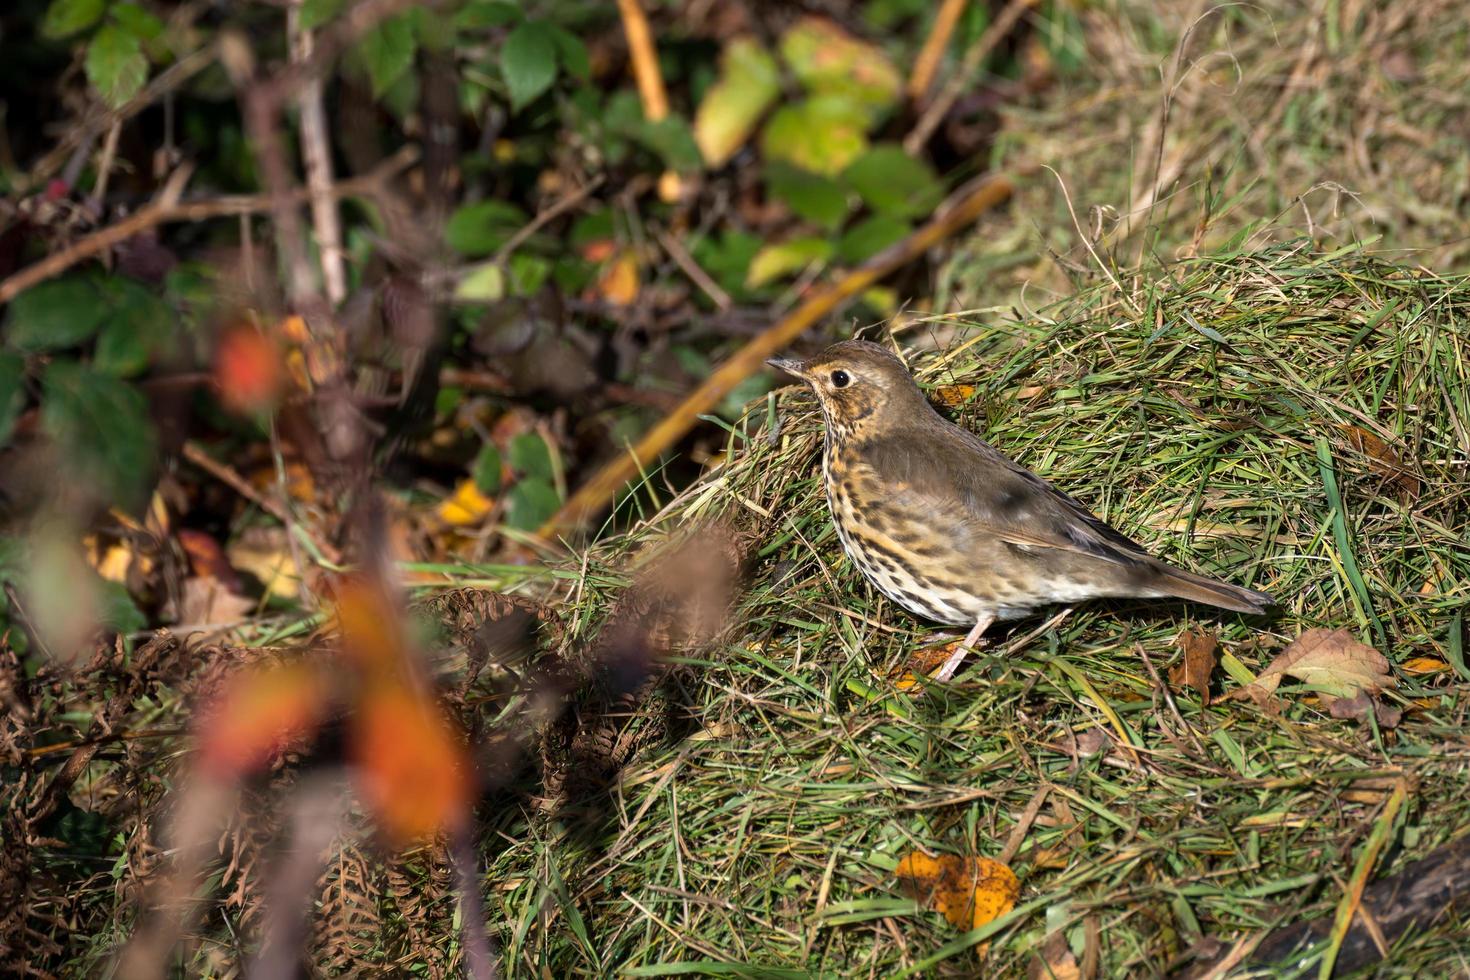 Song Thrush standing on some grass cuttings photo